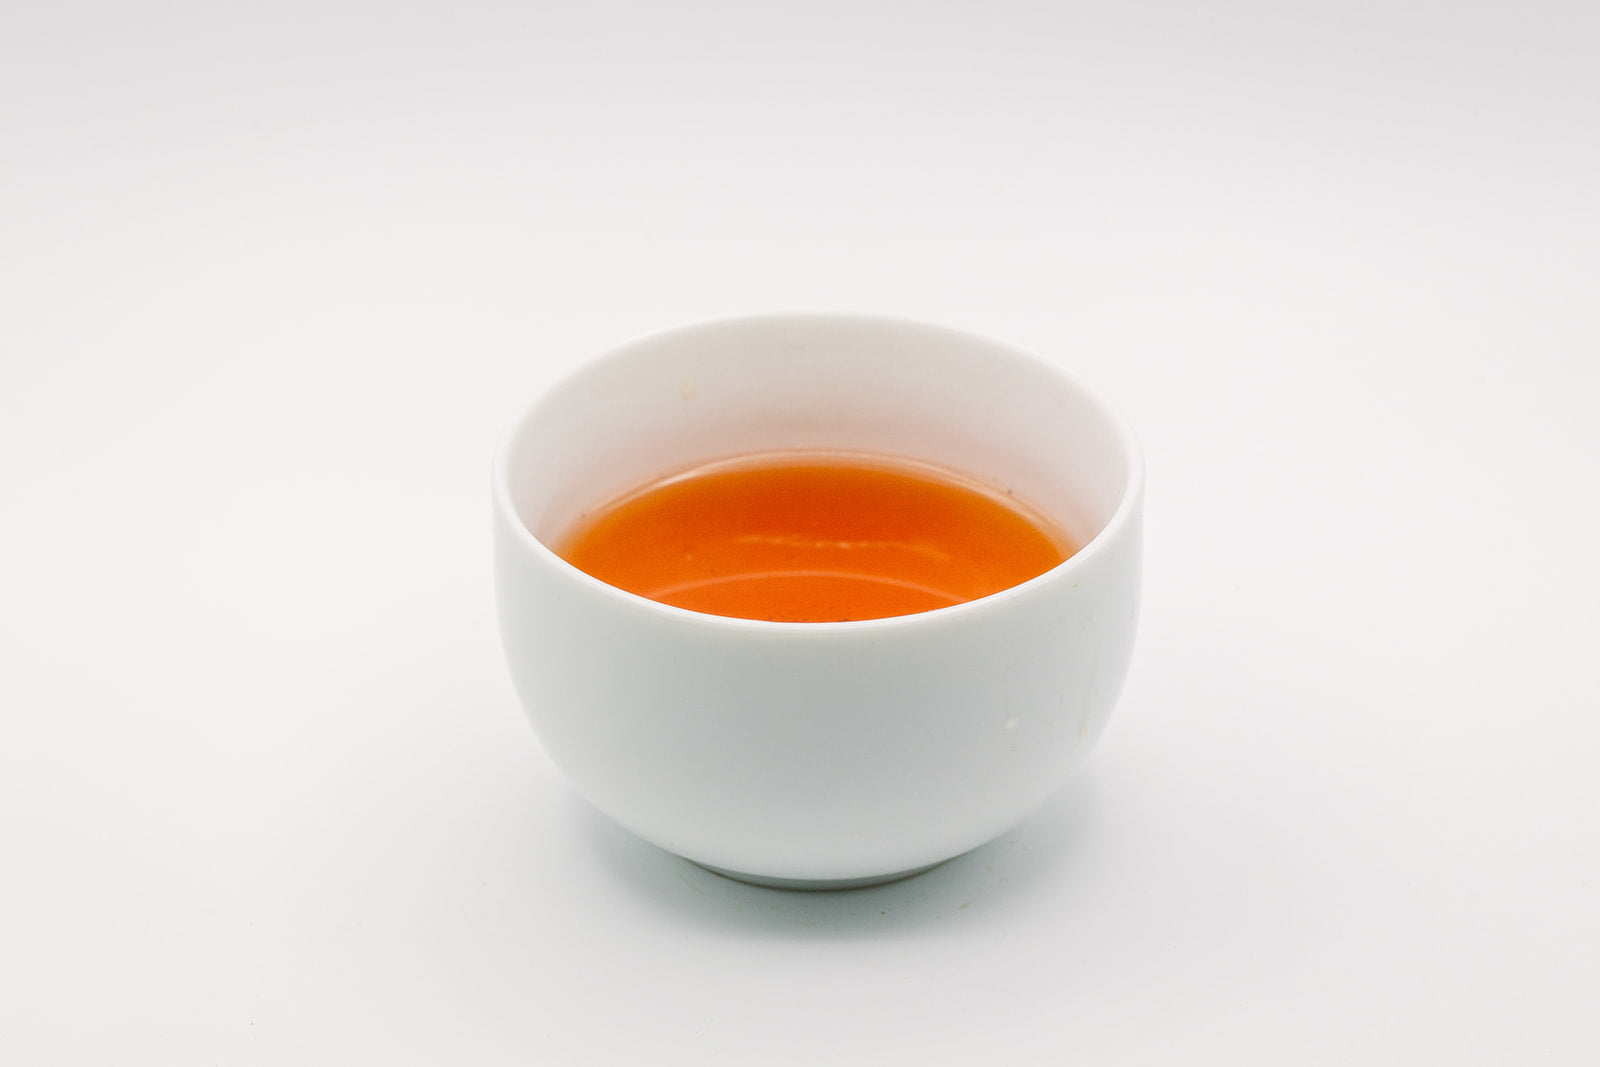 Formosa Oolong - New